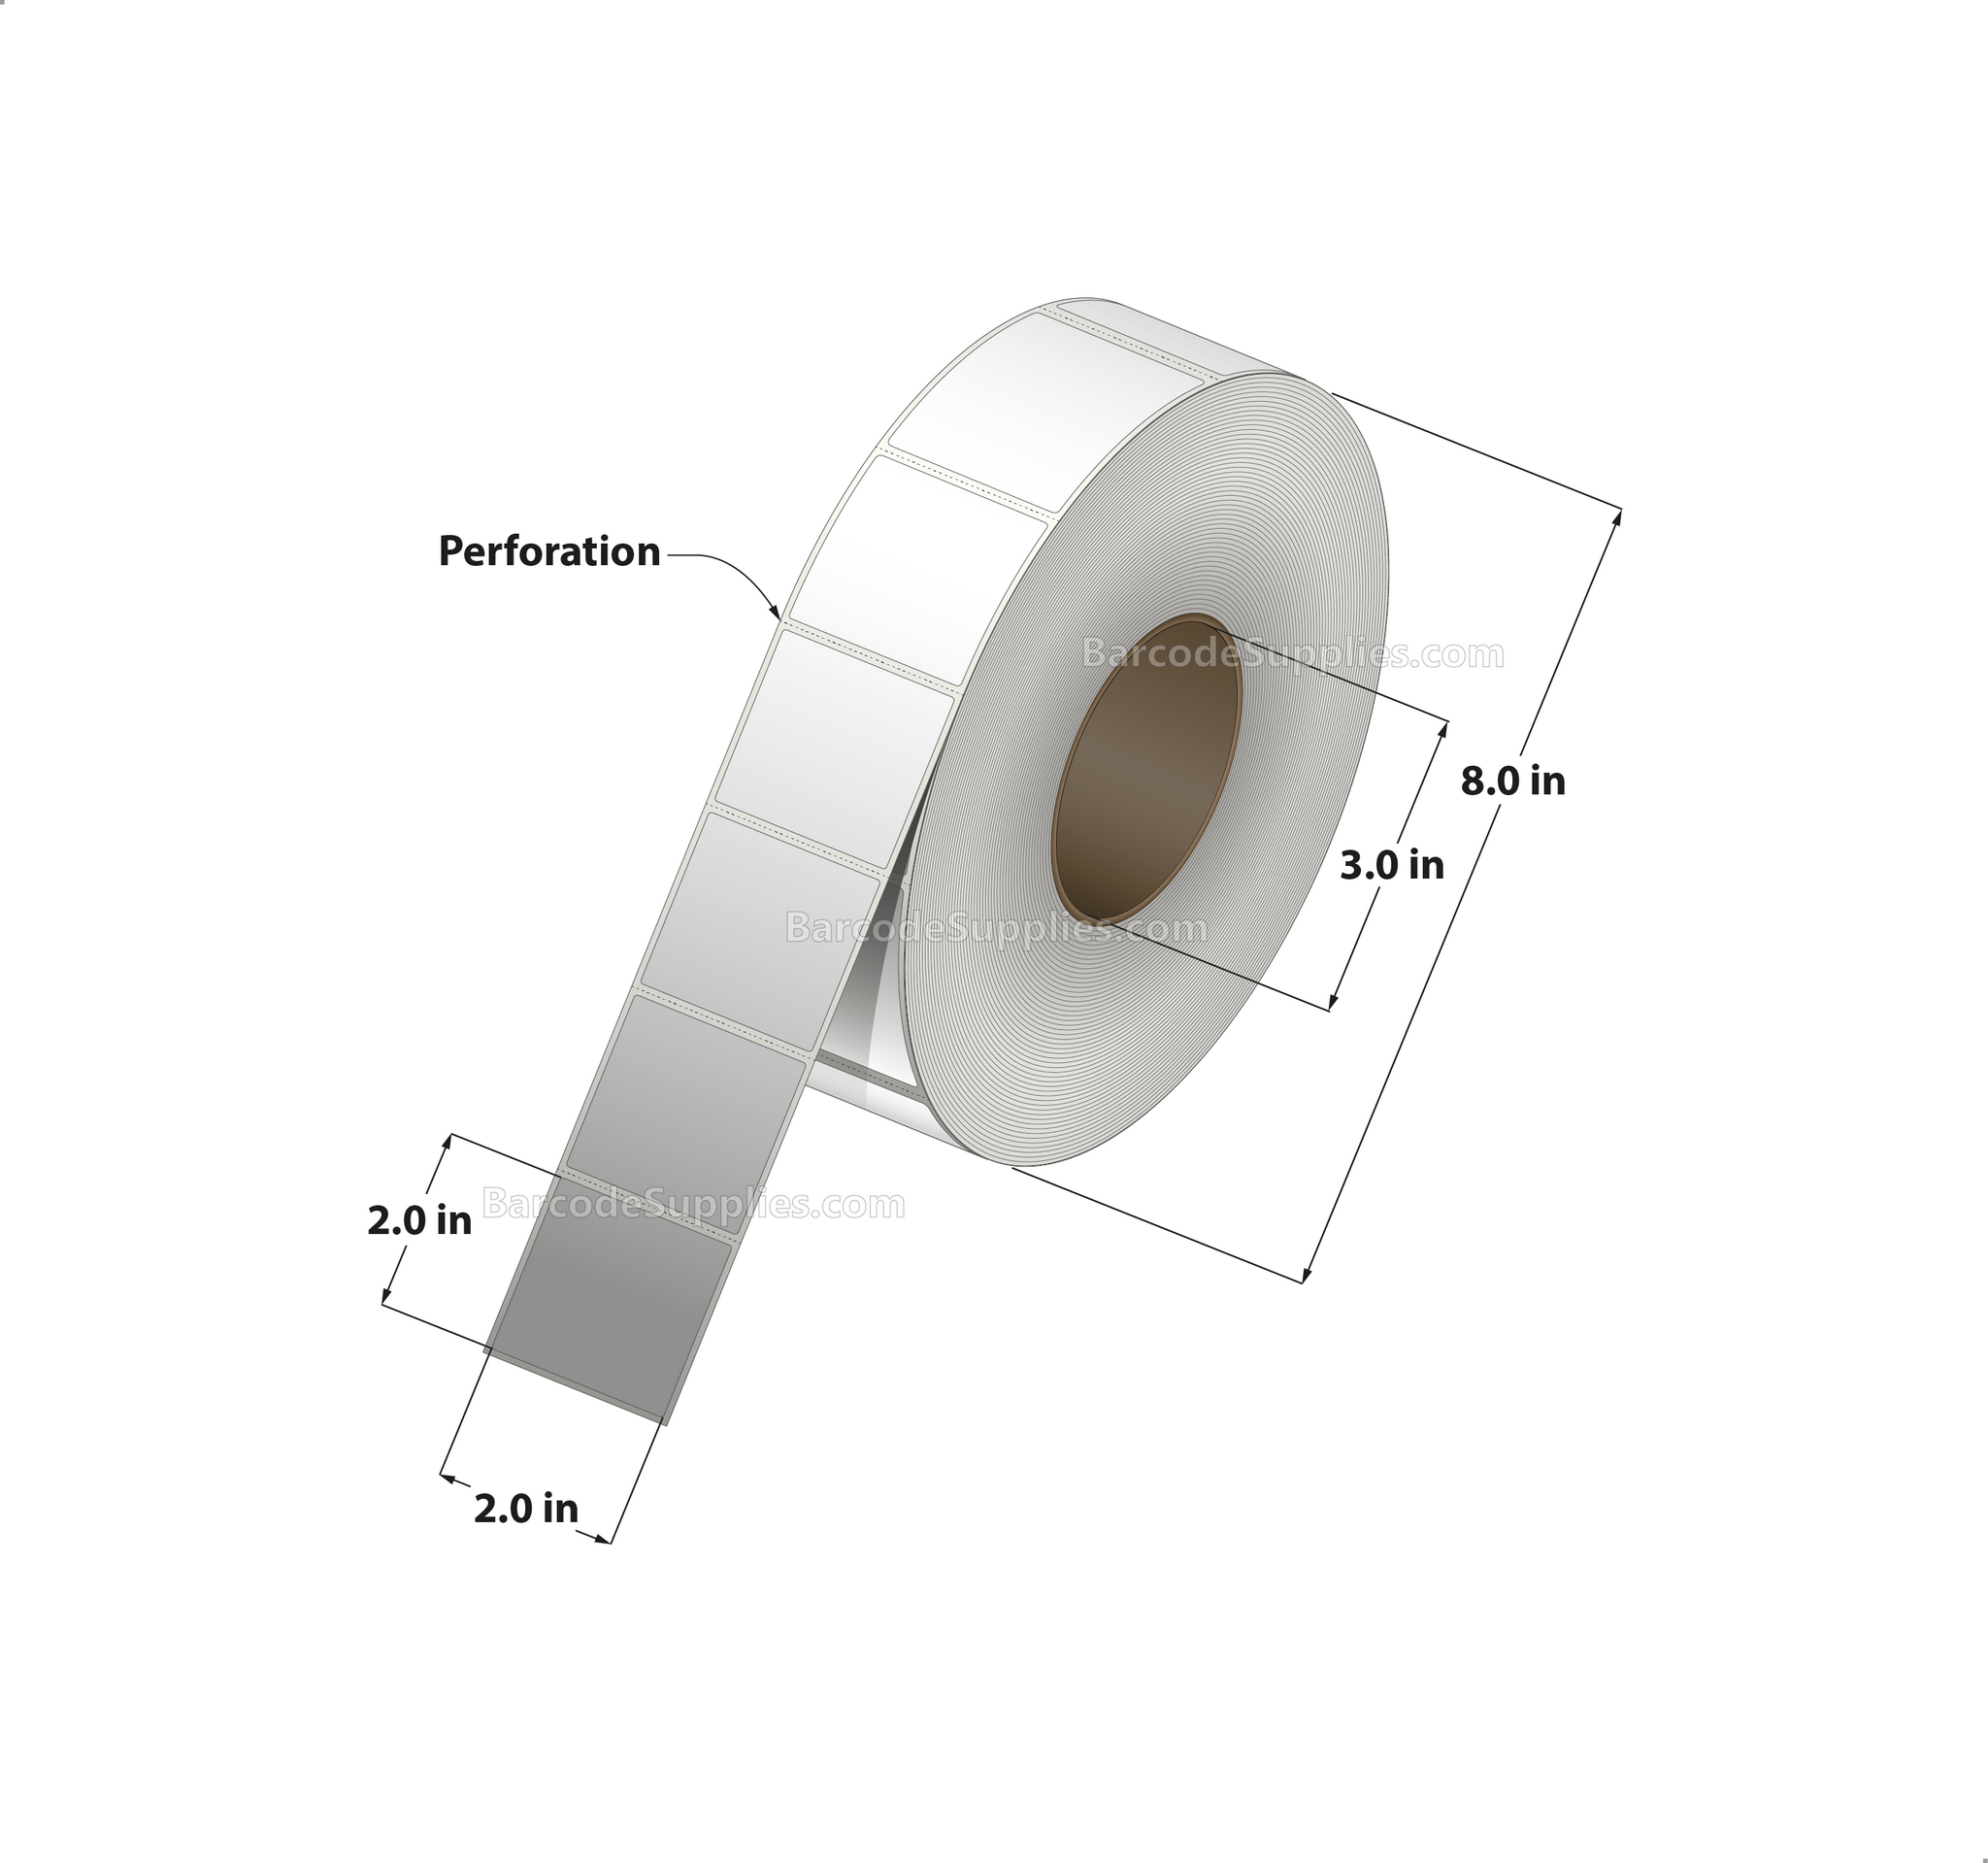 2 x 2 Thermal Transfer White Labels With Permanent Acrylic Adhesive - Perforated - 3000 Labels Per Roll - Carton Of 8 Rolls - 24000 Labels Total - MPN: TH22-1P